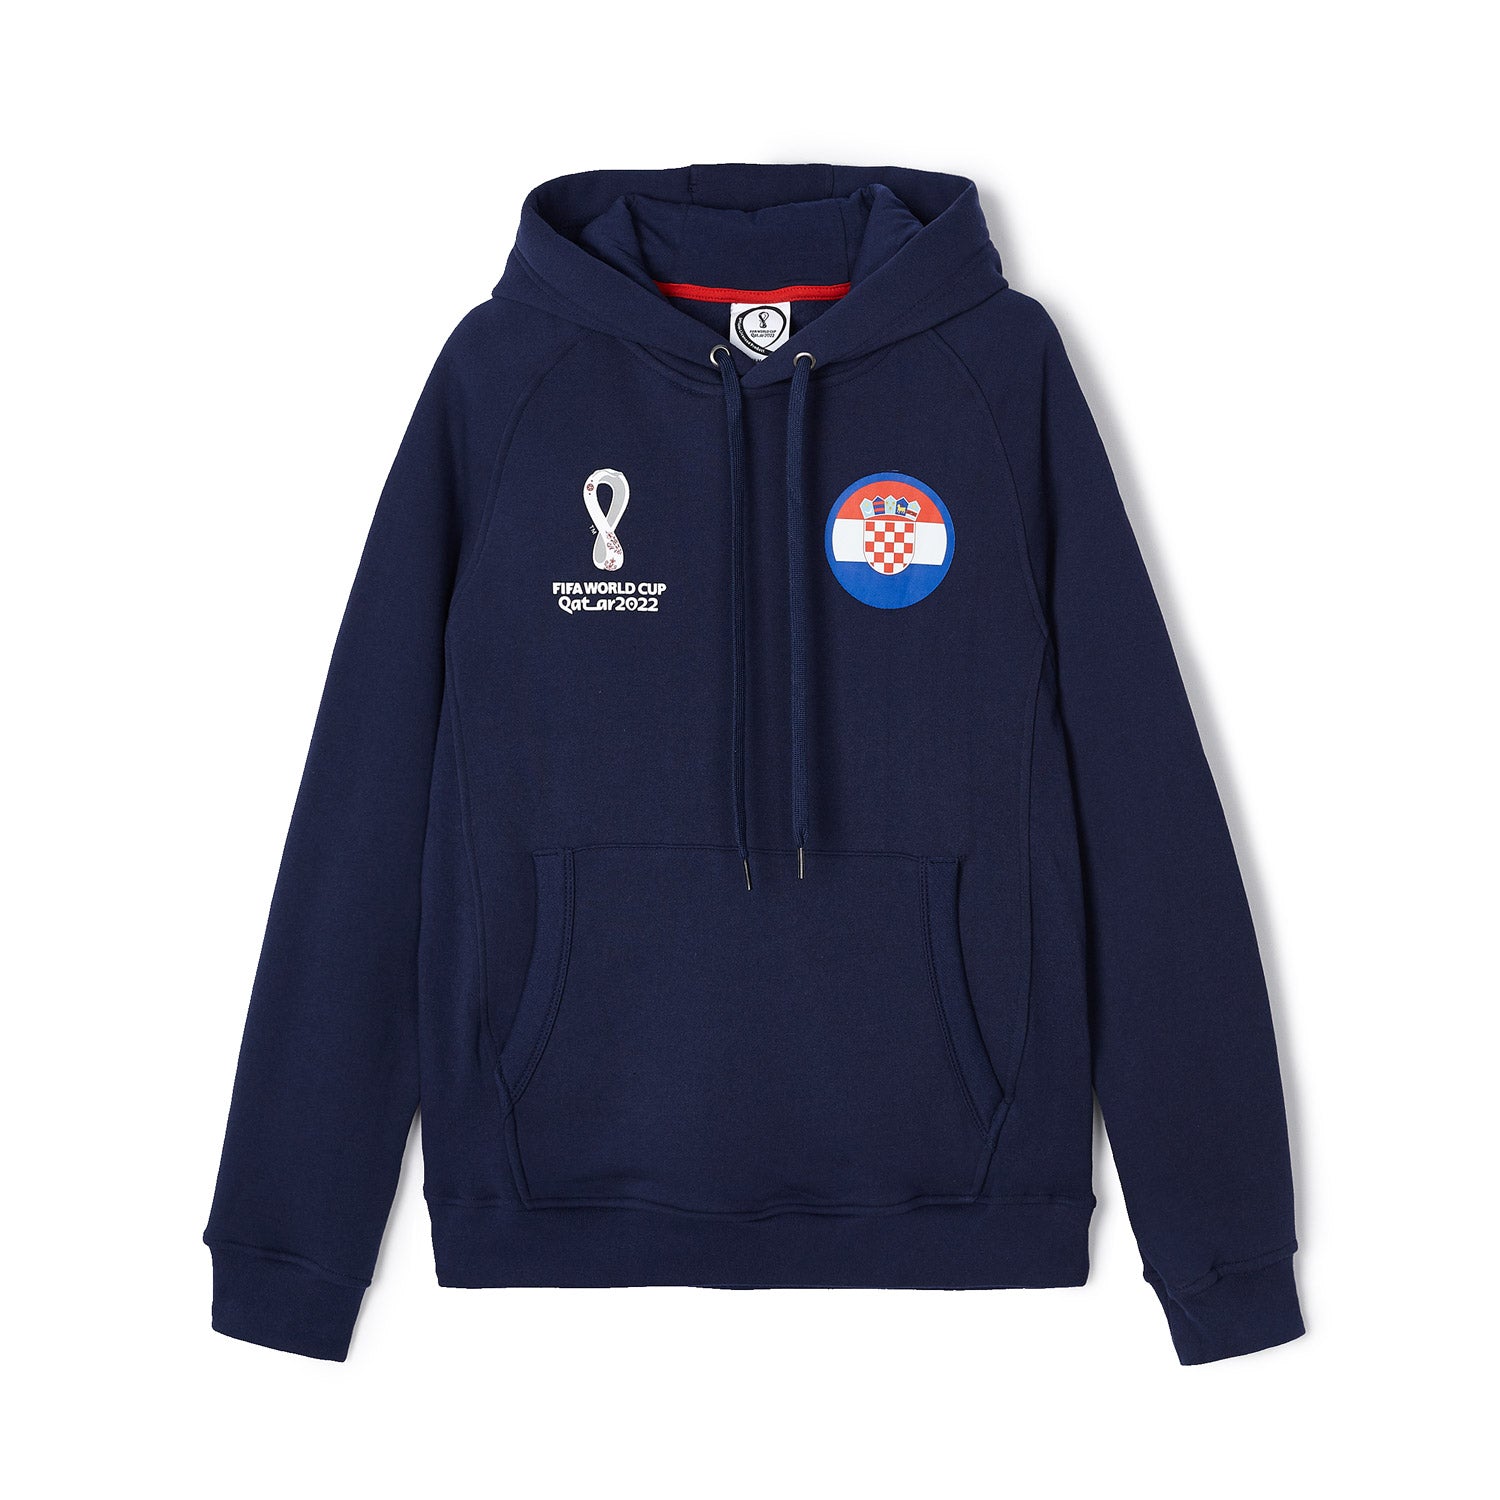 FIFA Store Hoodies For Sale - Up to 70% Off - Official FIFA Store